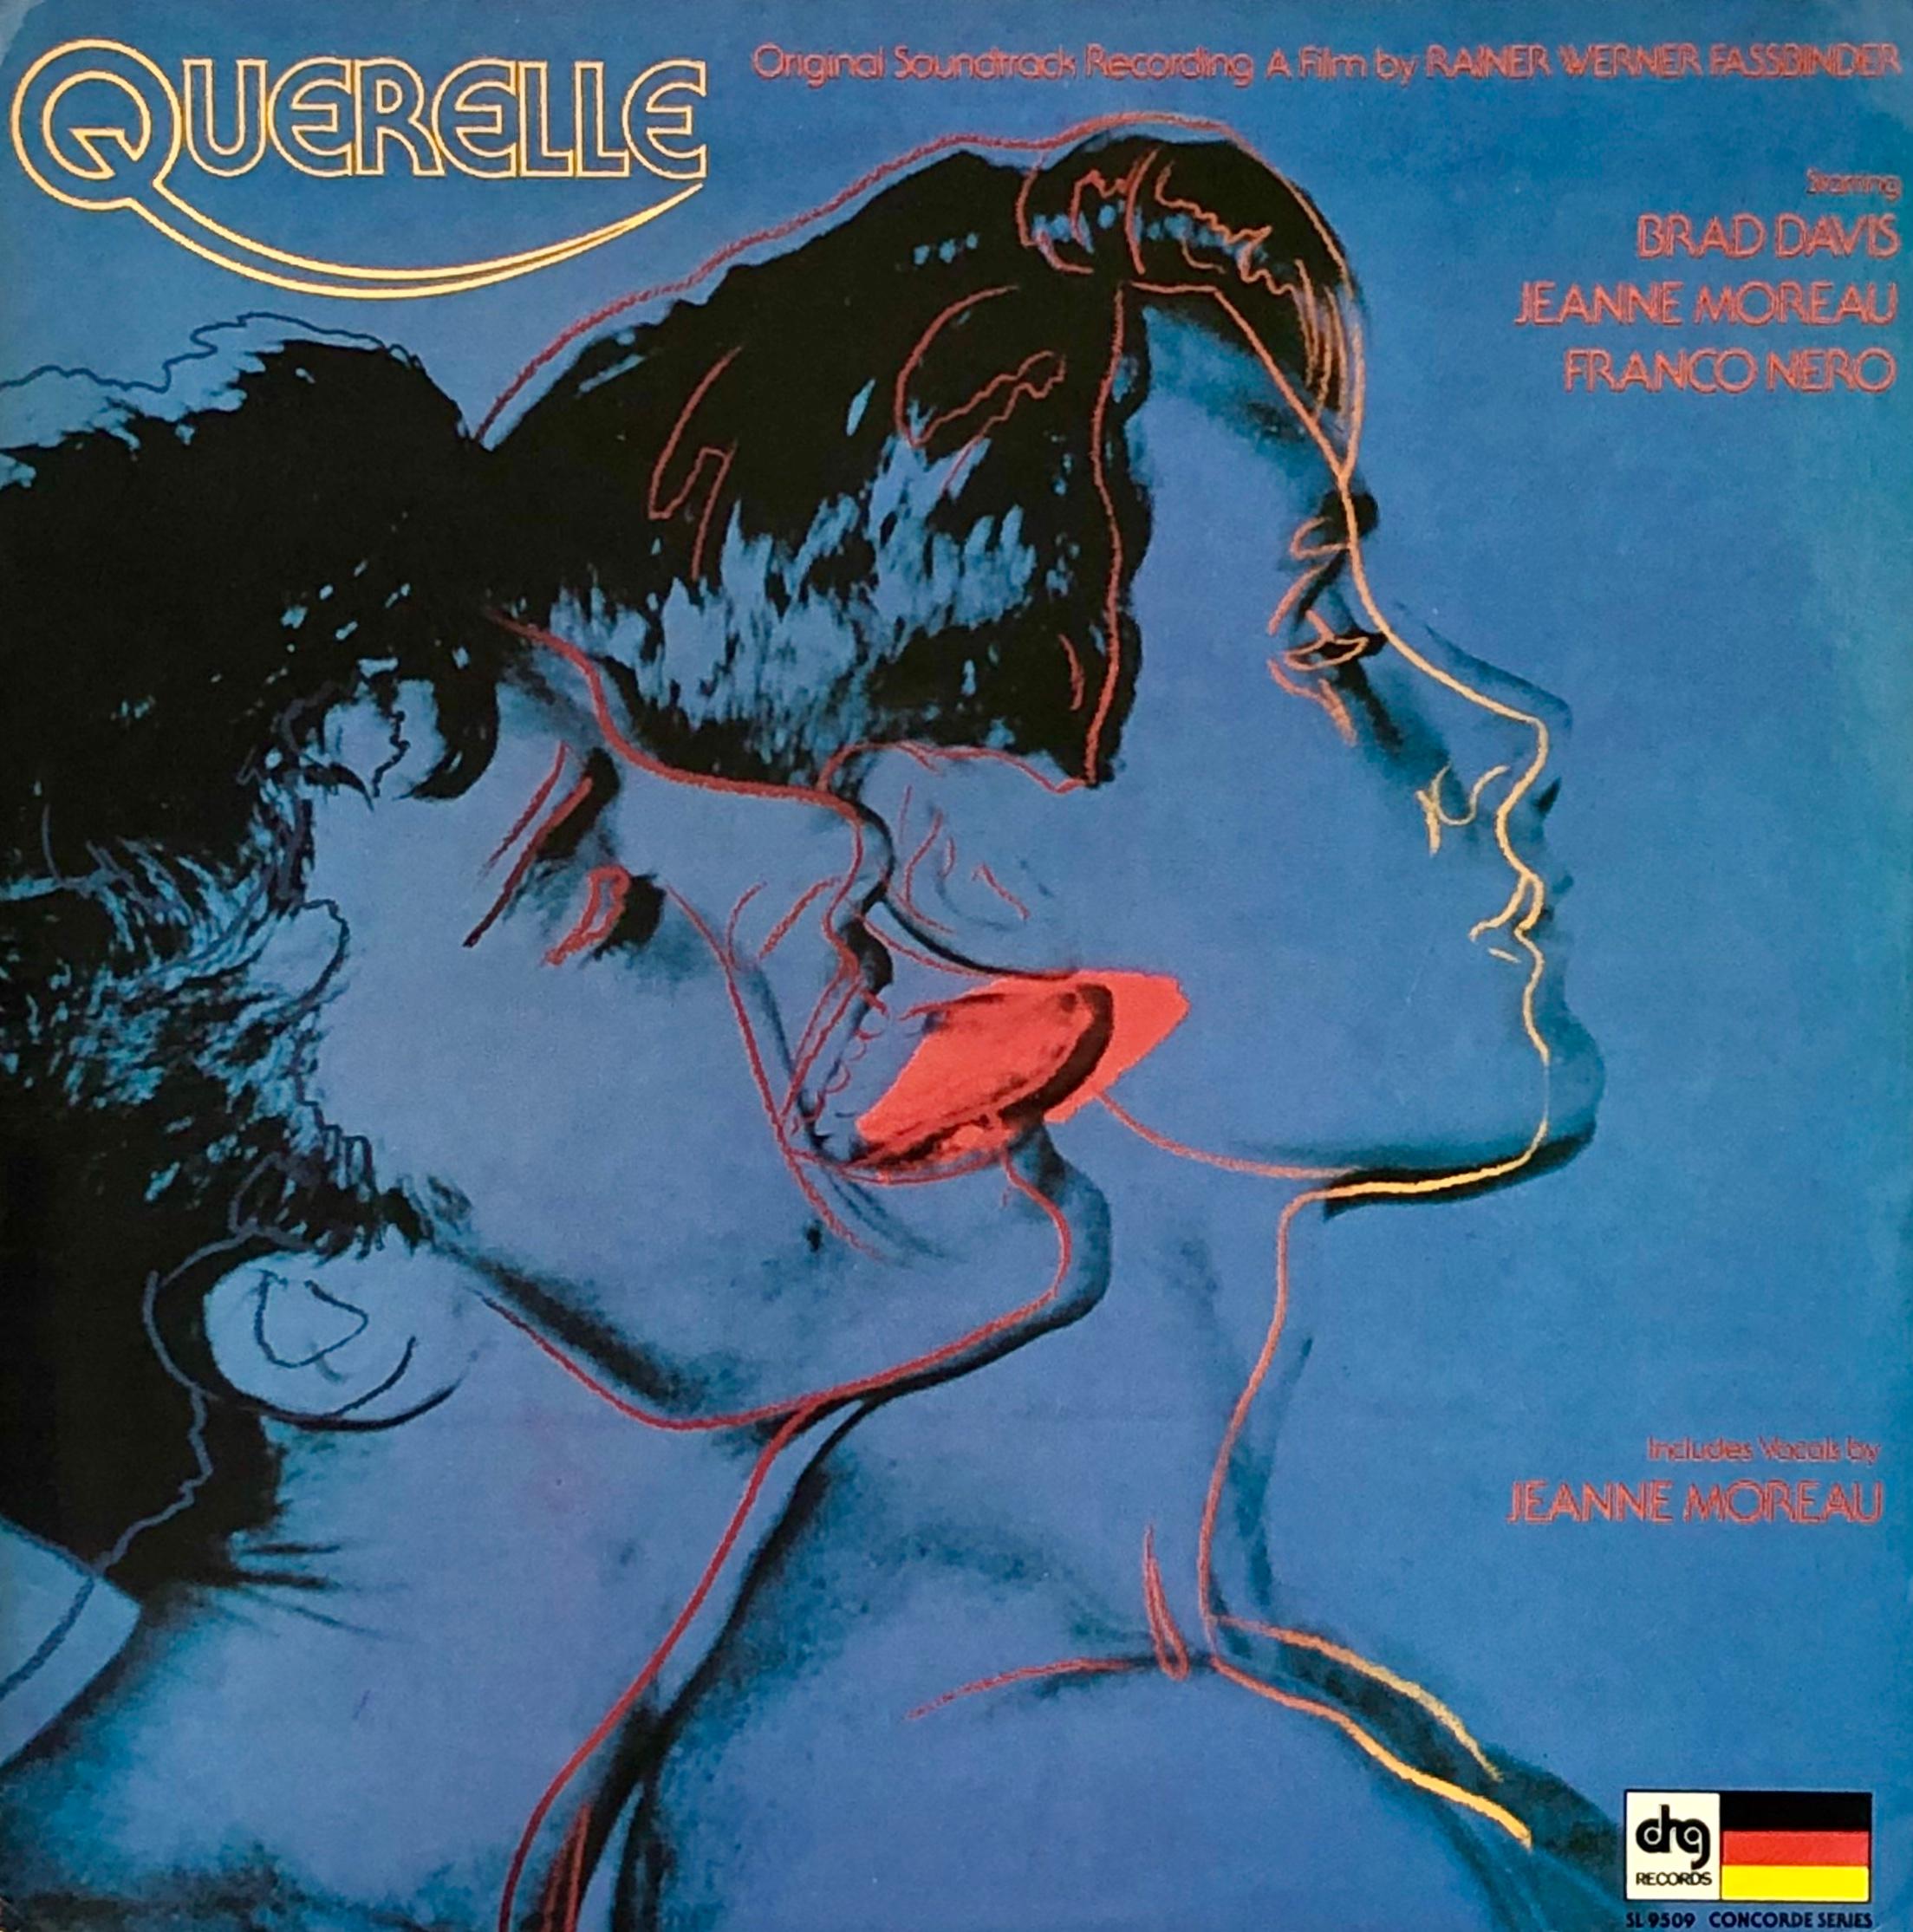 1982 1st pressing, Querelle vinyl album featuring Original Cover Art by Andy Warhol. Catalogue Raisonne: Paul Marechal: Andy Warhol, The Complete Commissioned Record Covers. 

Cover: Off-set print of Warhol's original screen print from the same